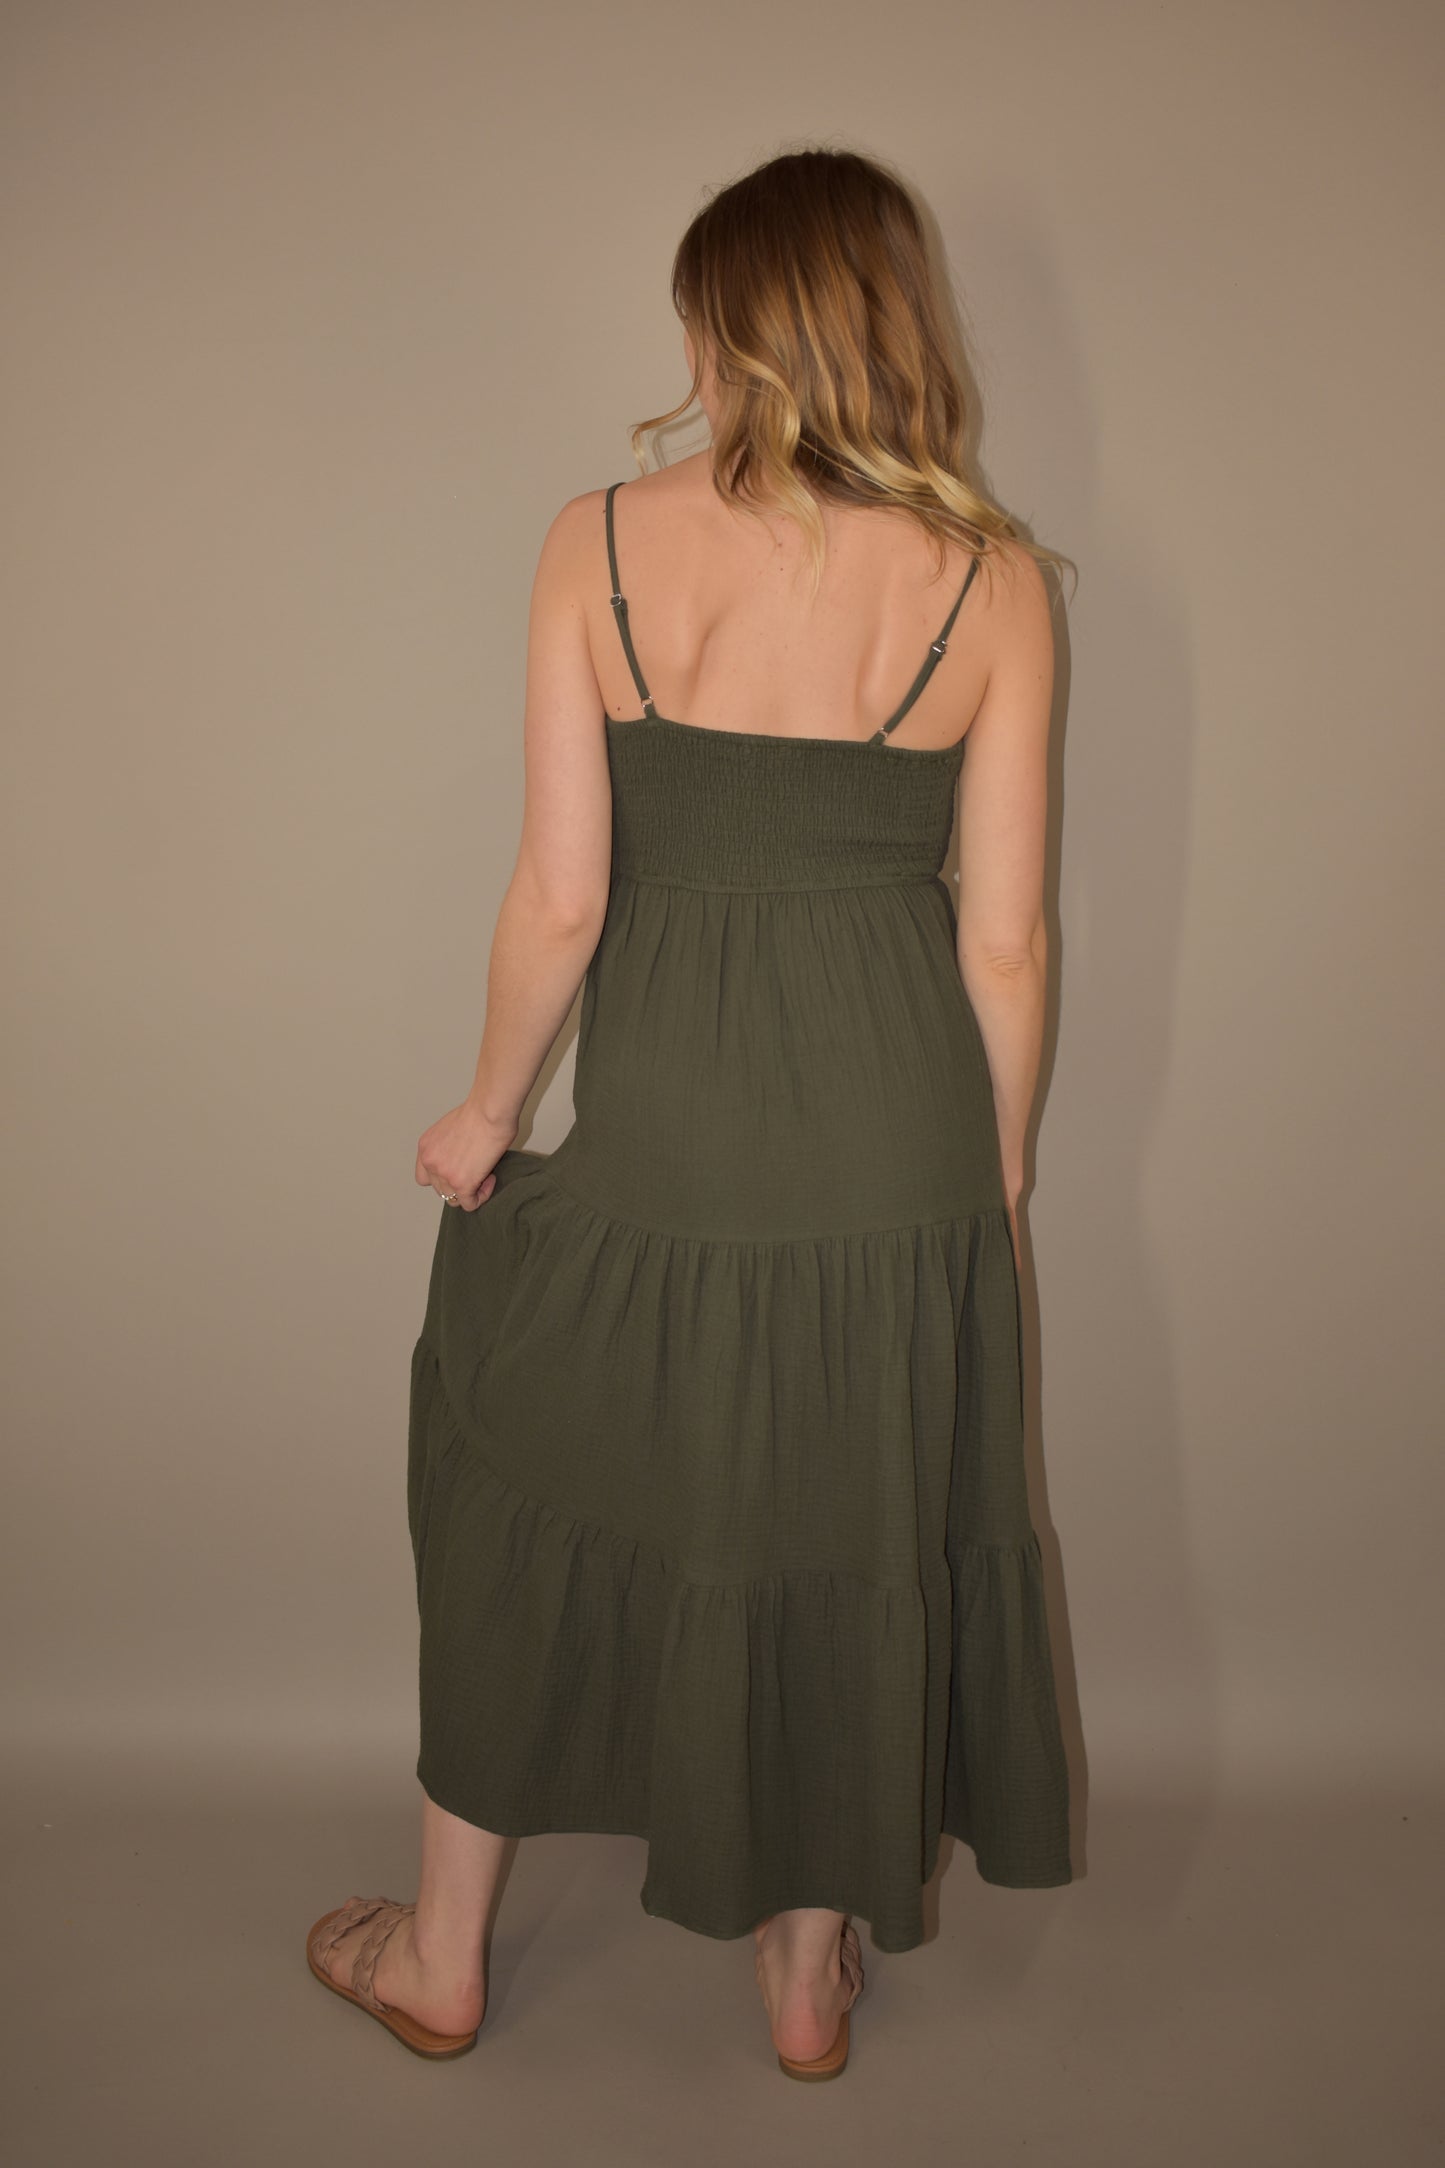 Tiered midi spaghetti strap dress. olive green. lightweight fabric. adjustable straps. flowy but fitted bodice. smocked/ stretchy back.   